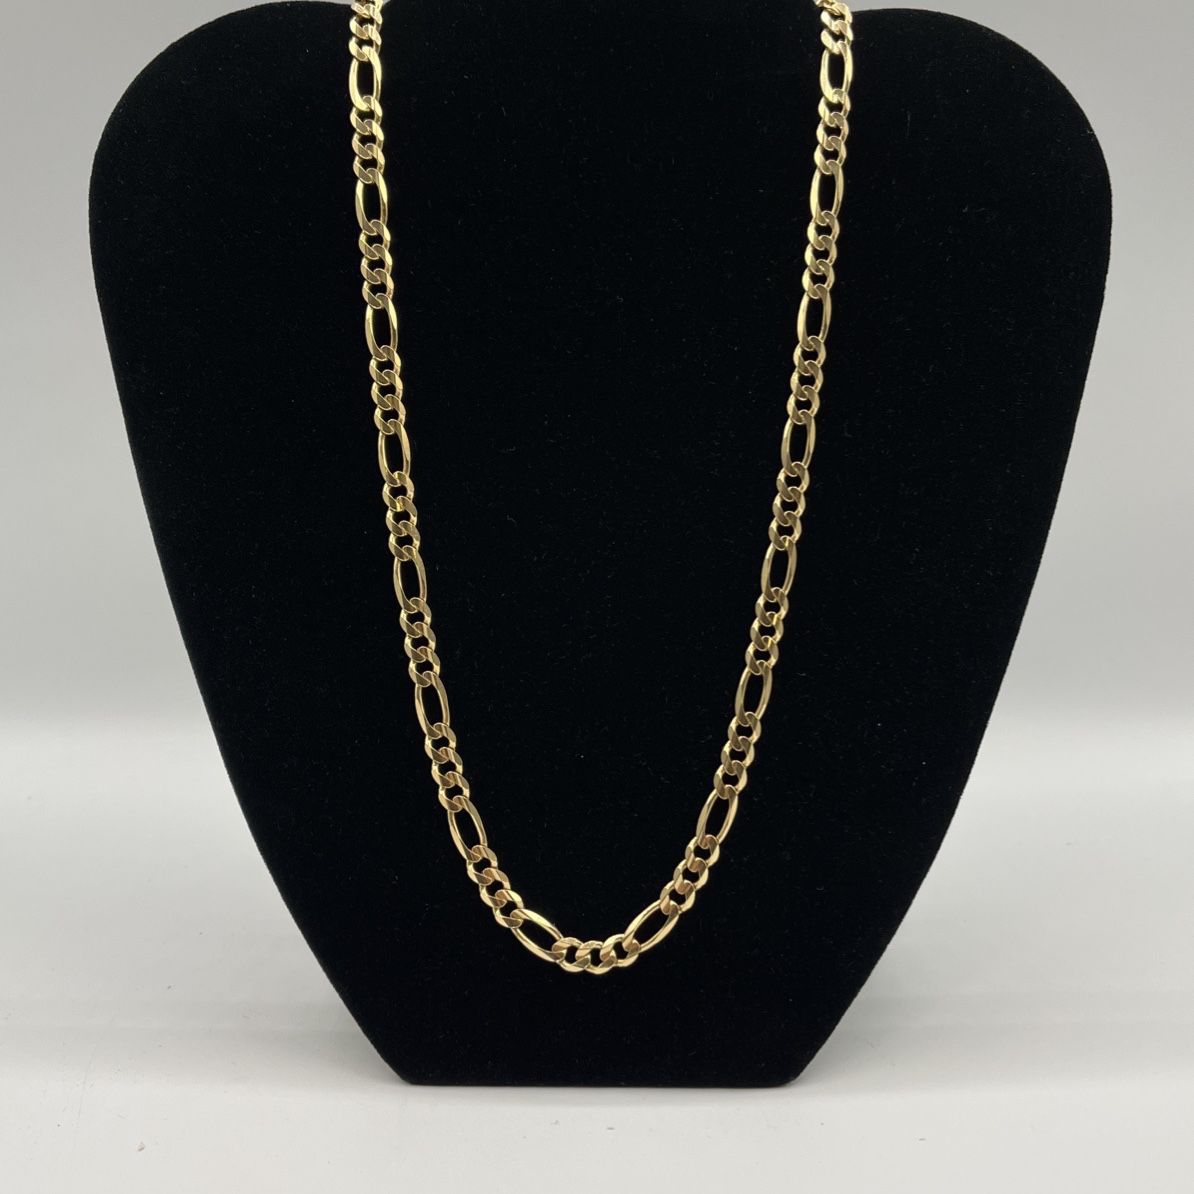 14K Solid Yellow Gold Figaro Link Chain Necklace 27.1 Grams 20” Length 6 mm Width